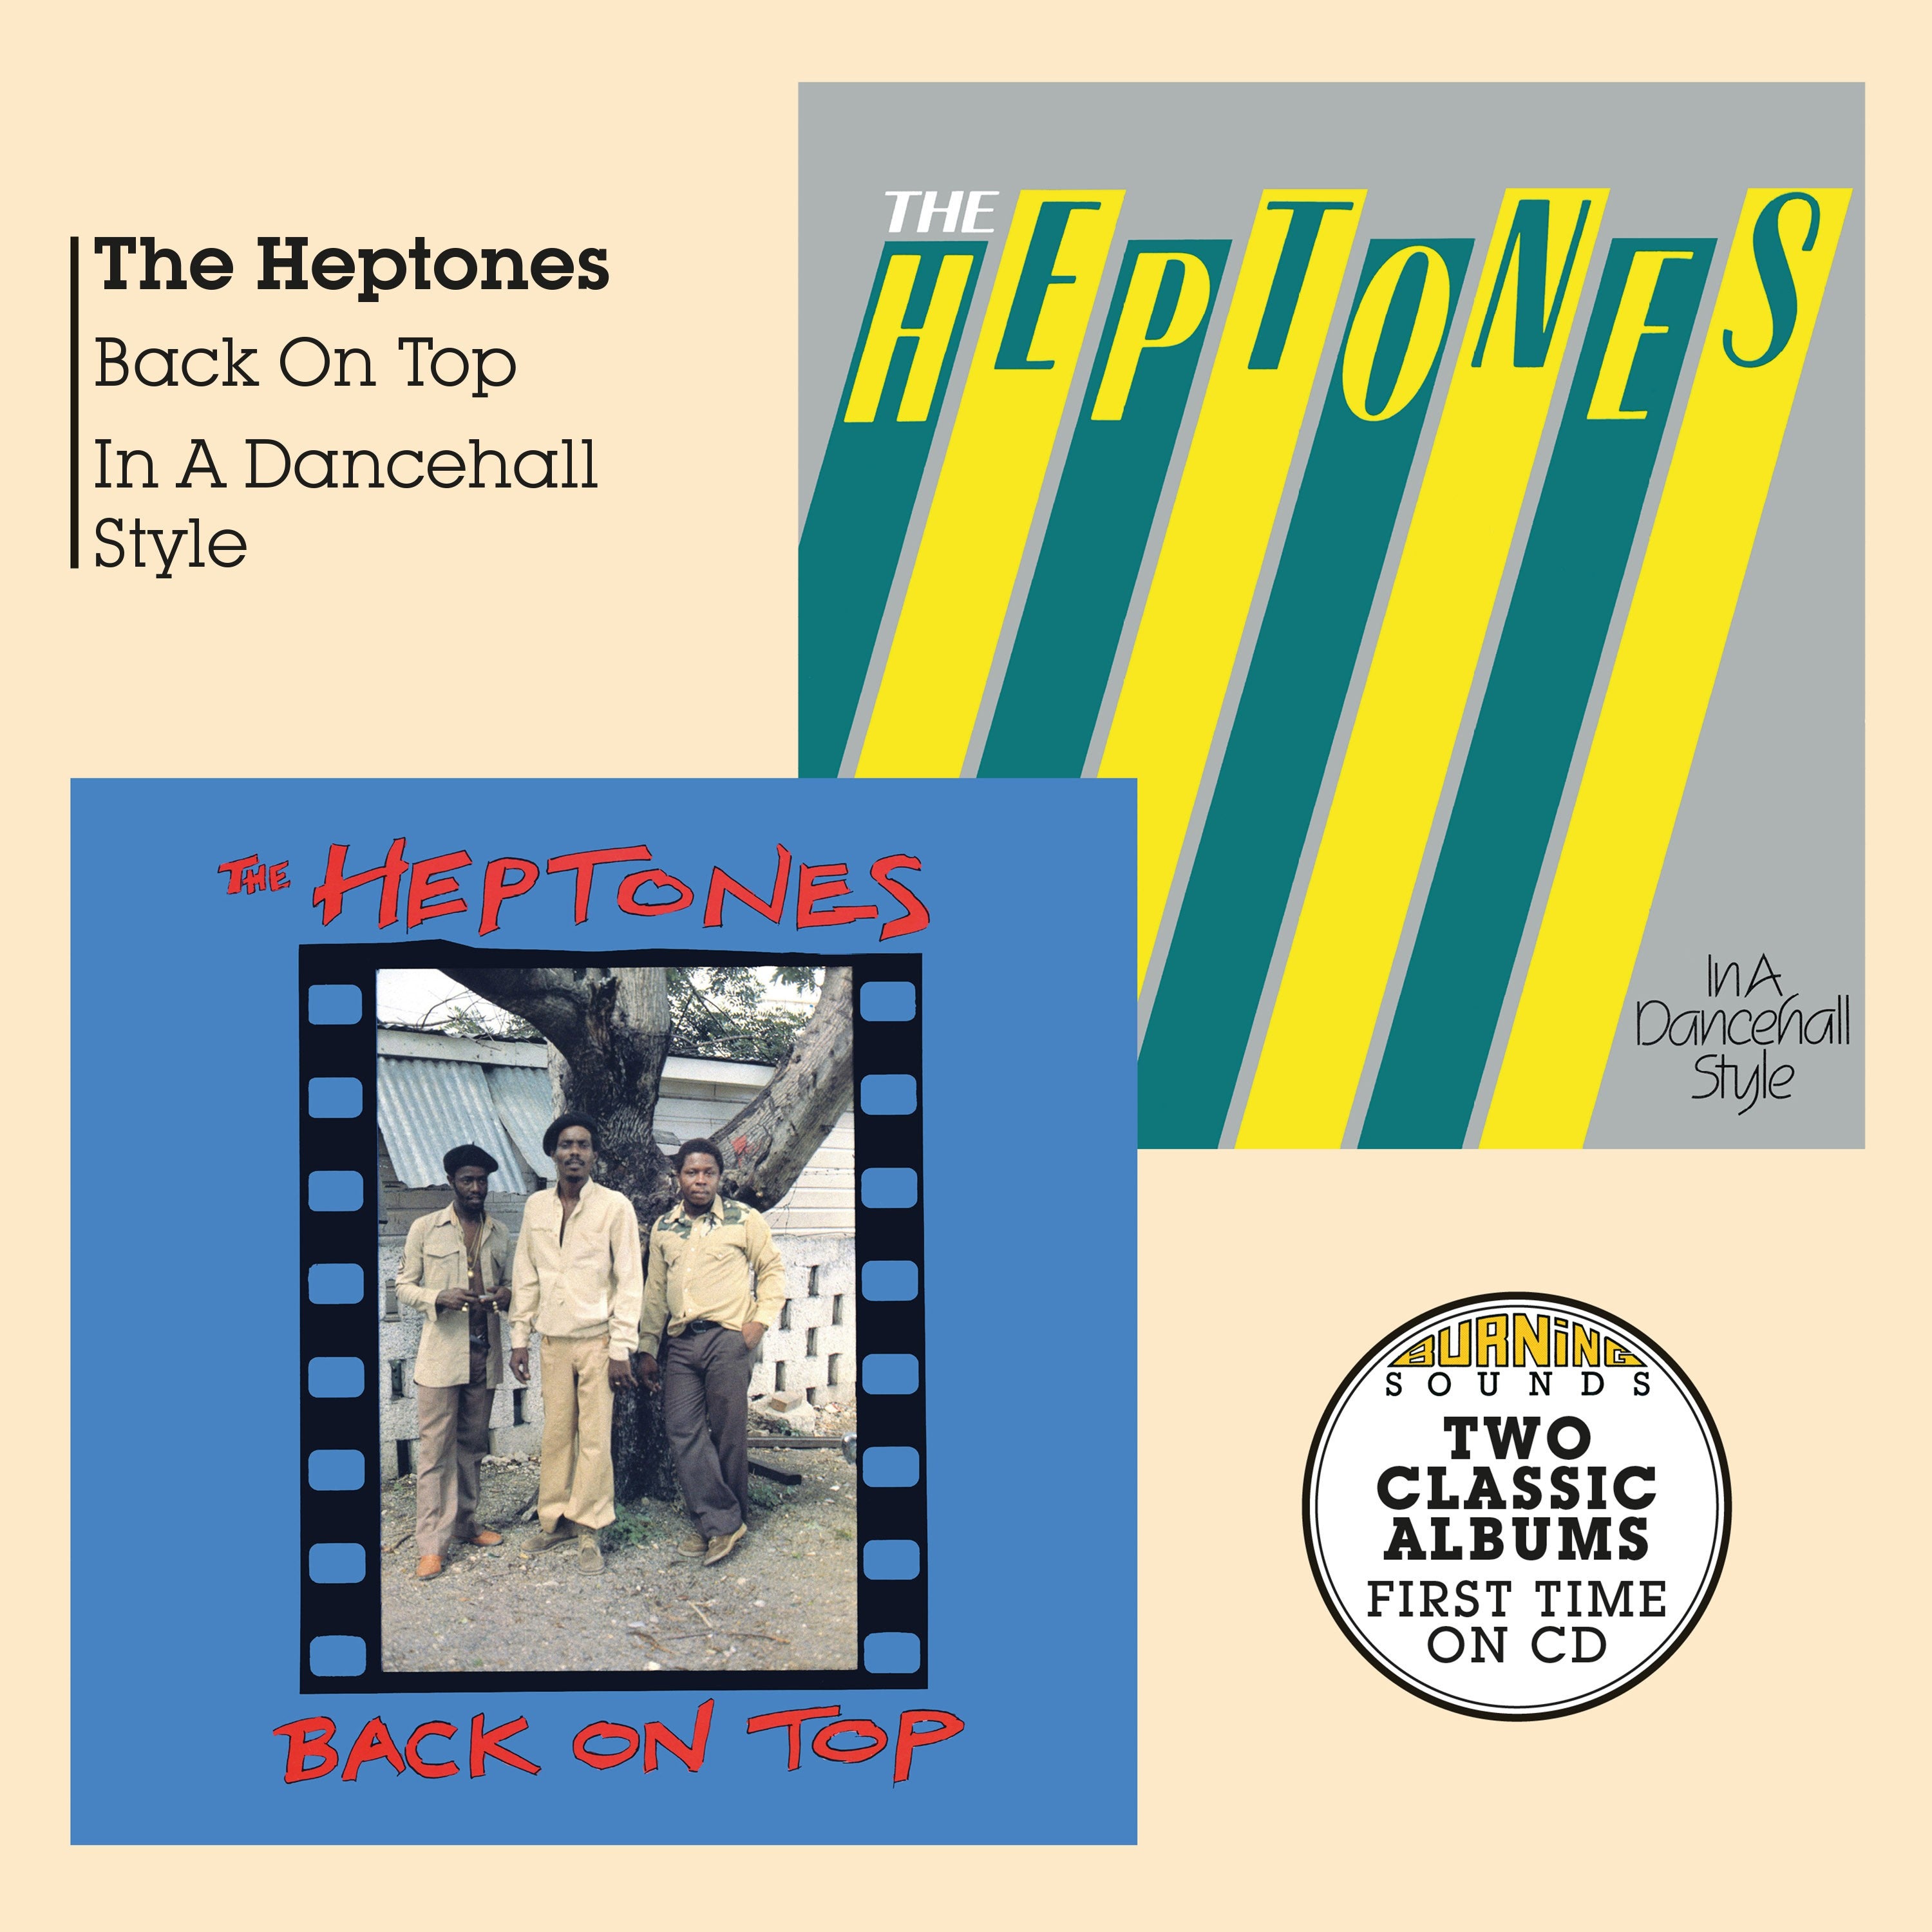 The Heptones - Back On Top + In A Dancehall Style - CD Album